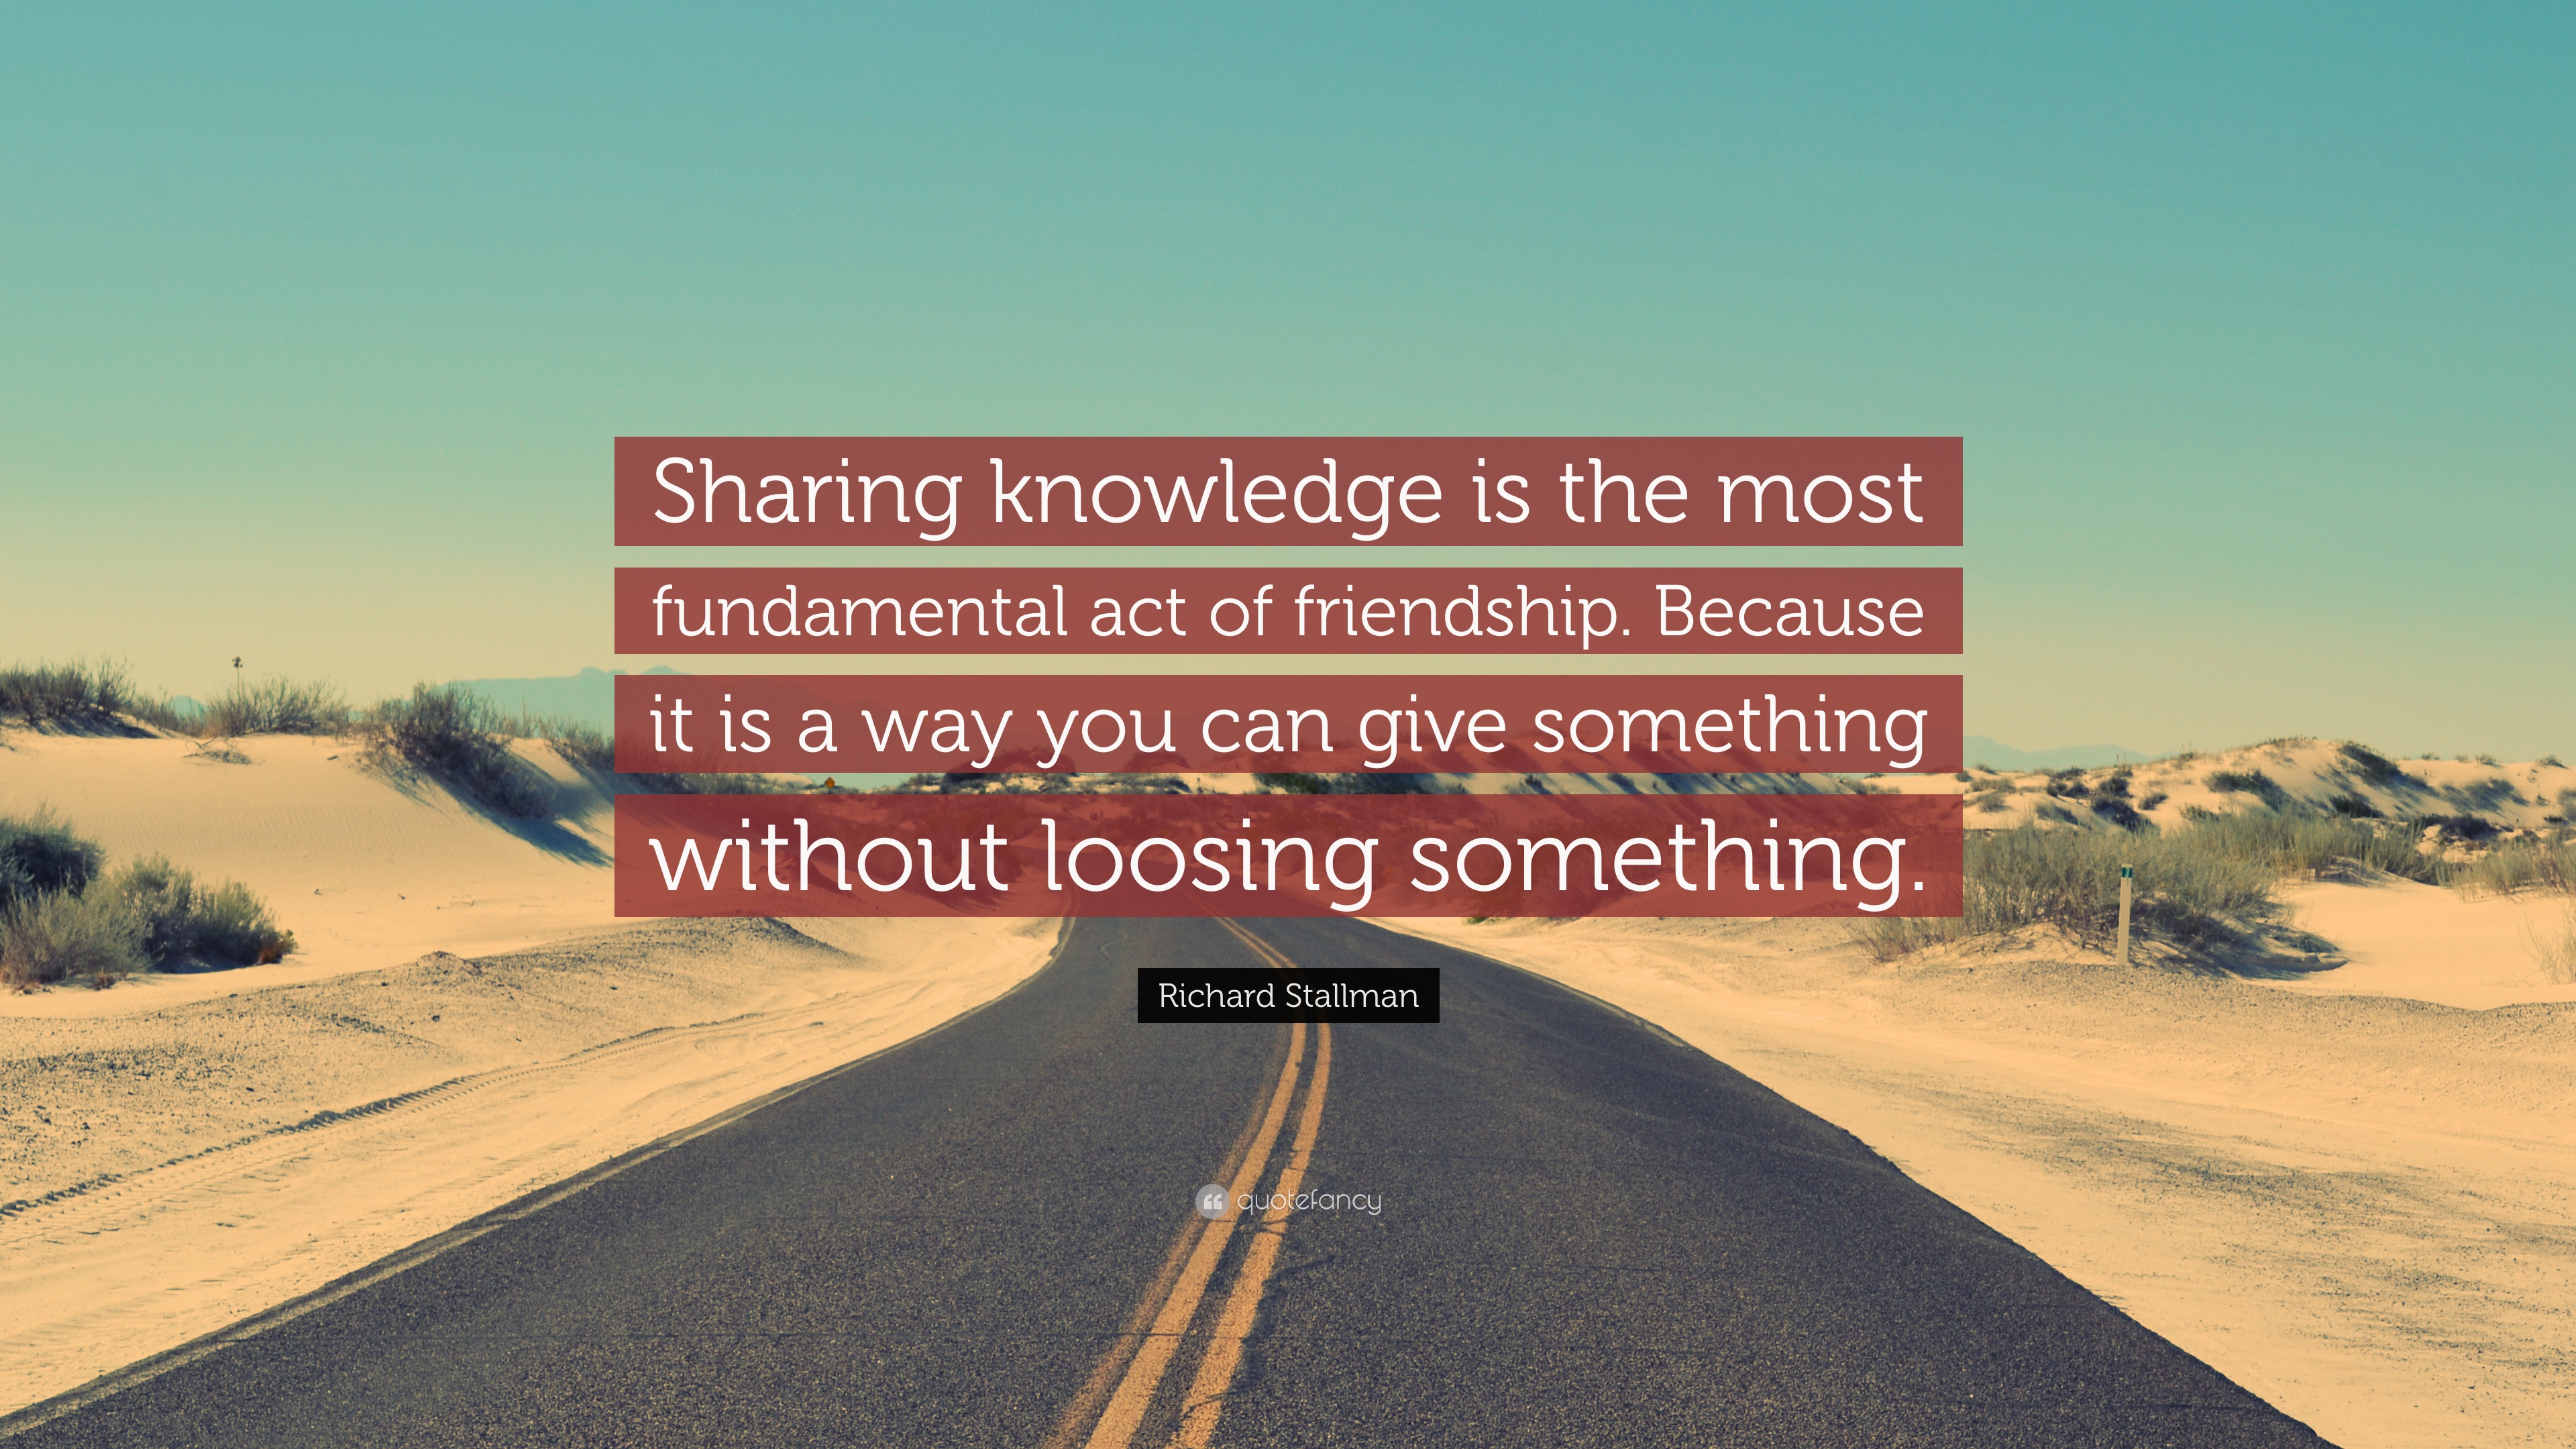 quotes about sharing your story